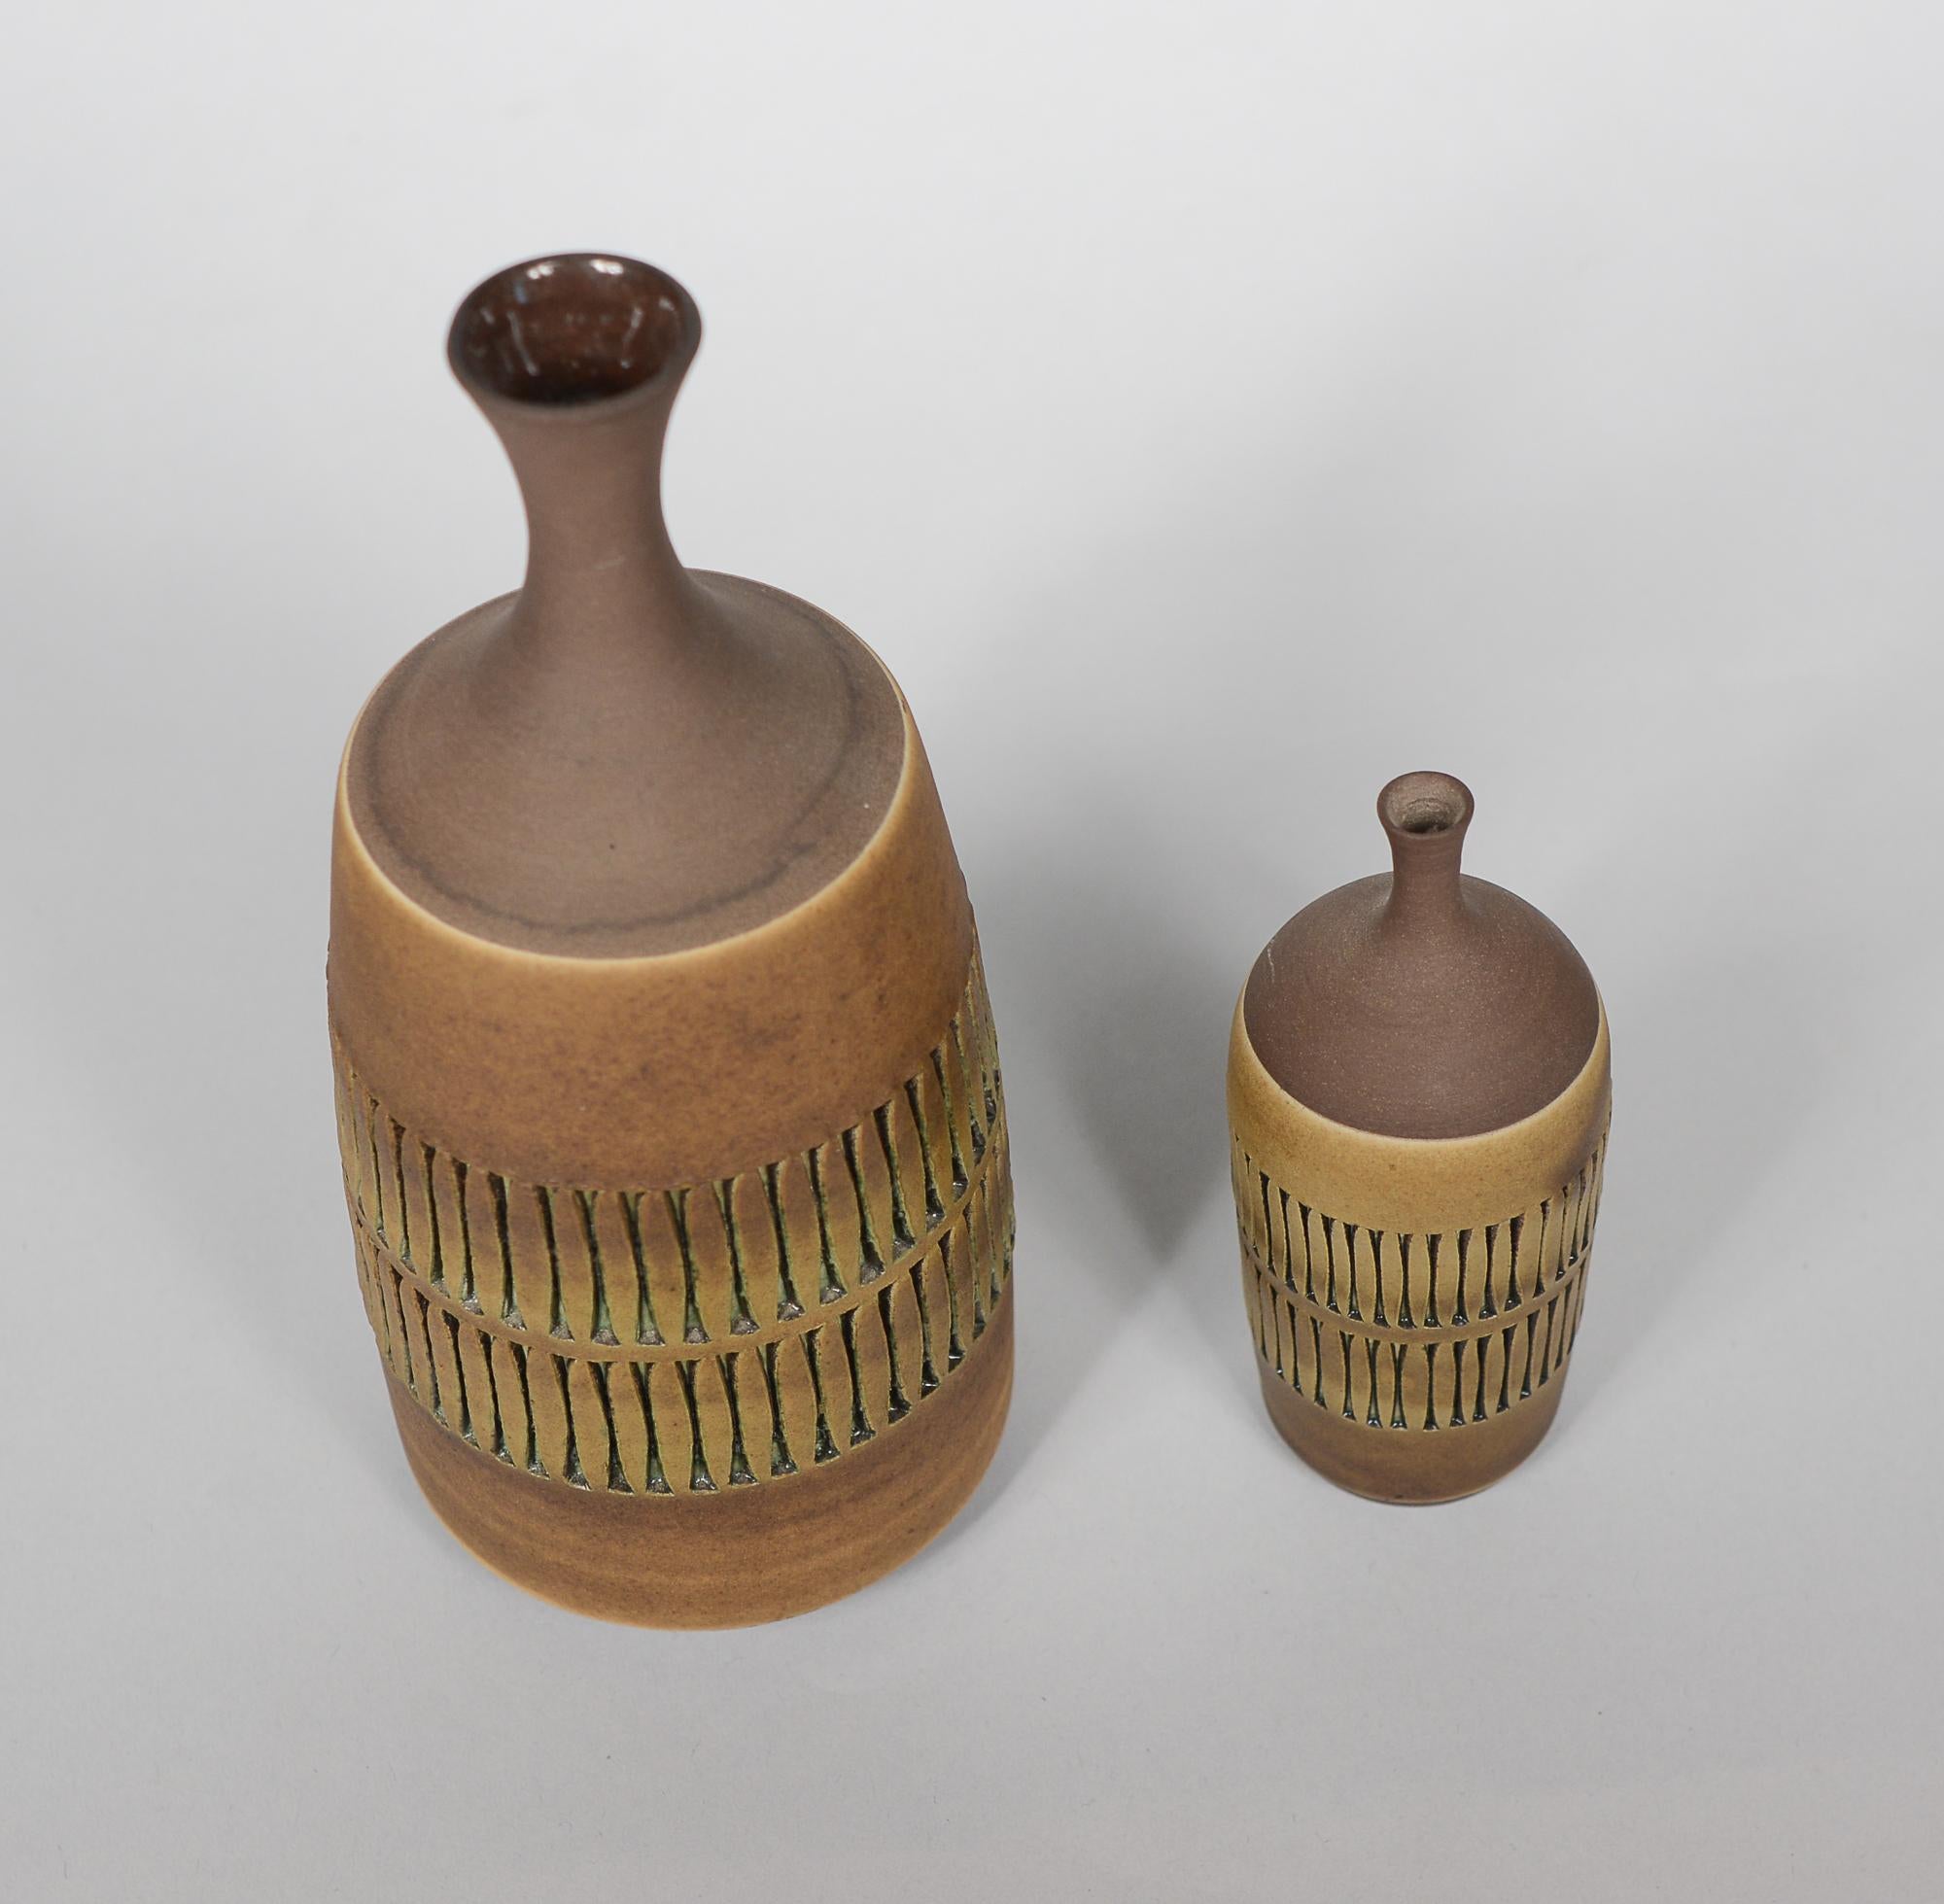 Two incised ceramic vases by Swedish artist Tomas Anagrius. These were made at his studio in Alingsas, Sweden in the 1960's.